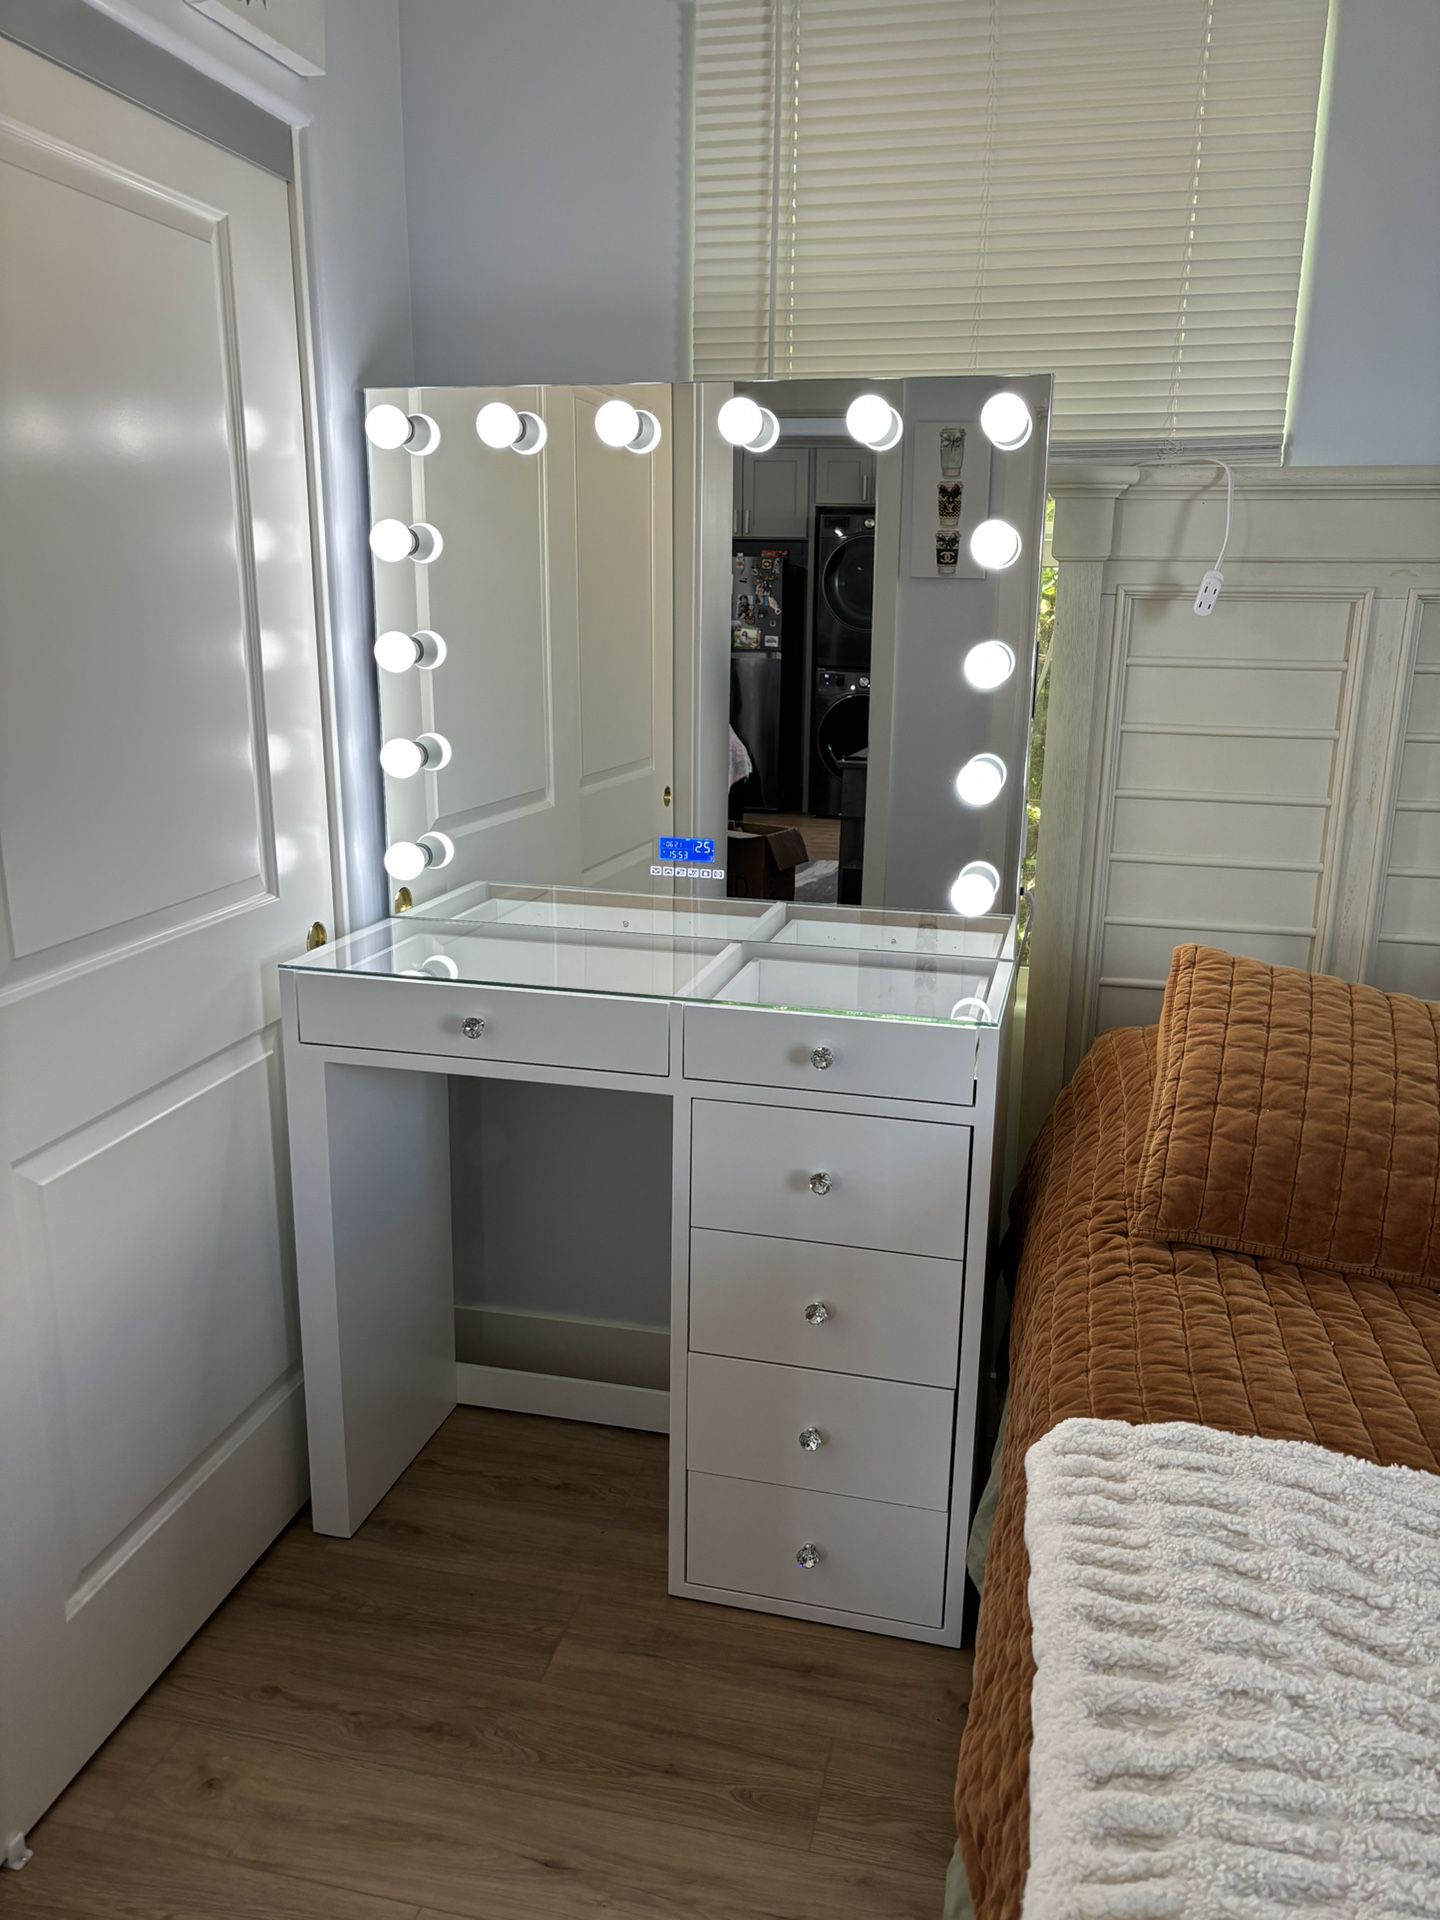 New 40 In Makeup Vanity With Bluetooth Mirror😍❤️